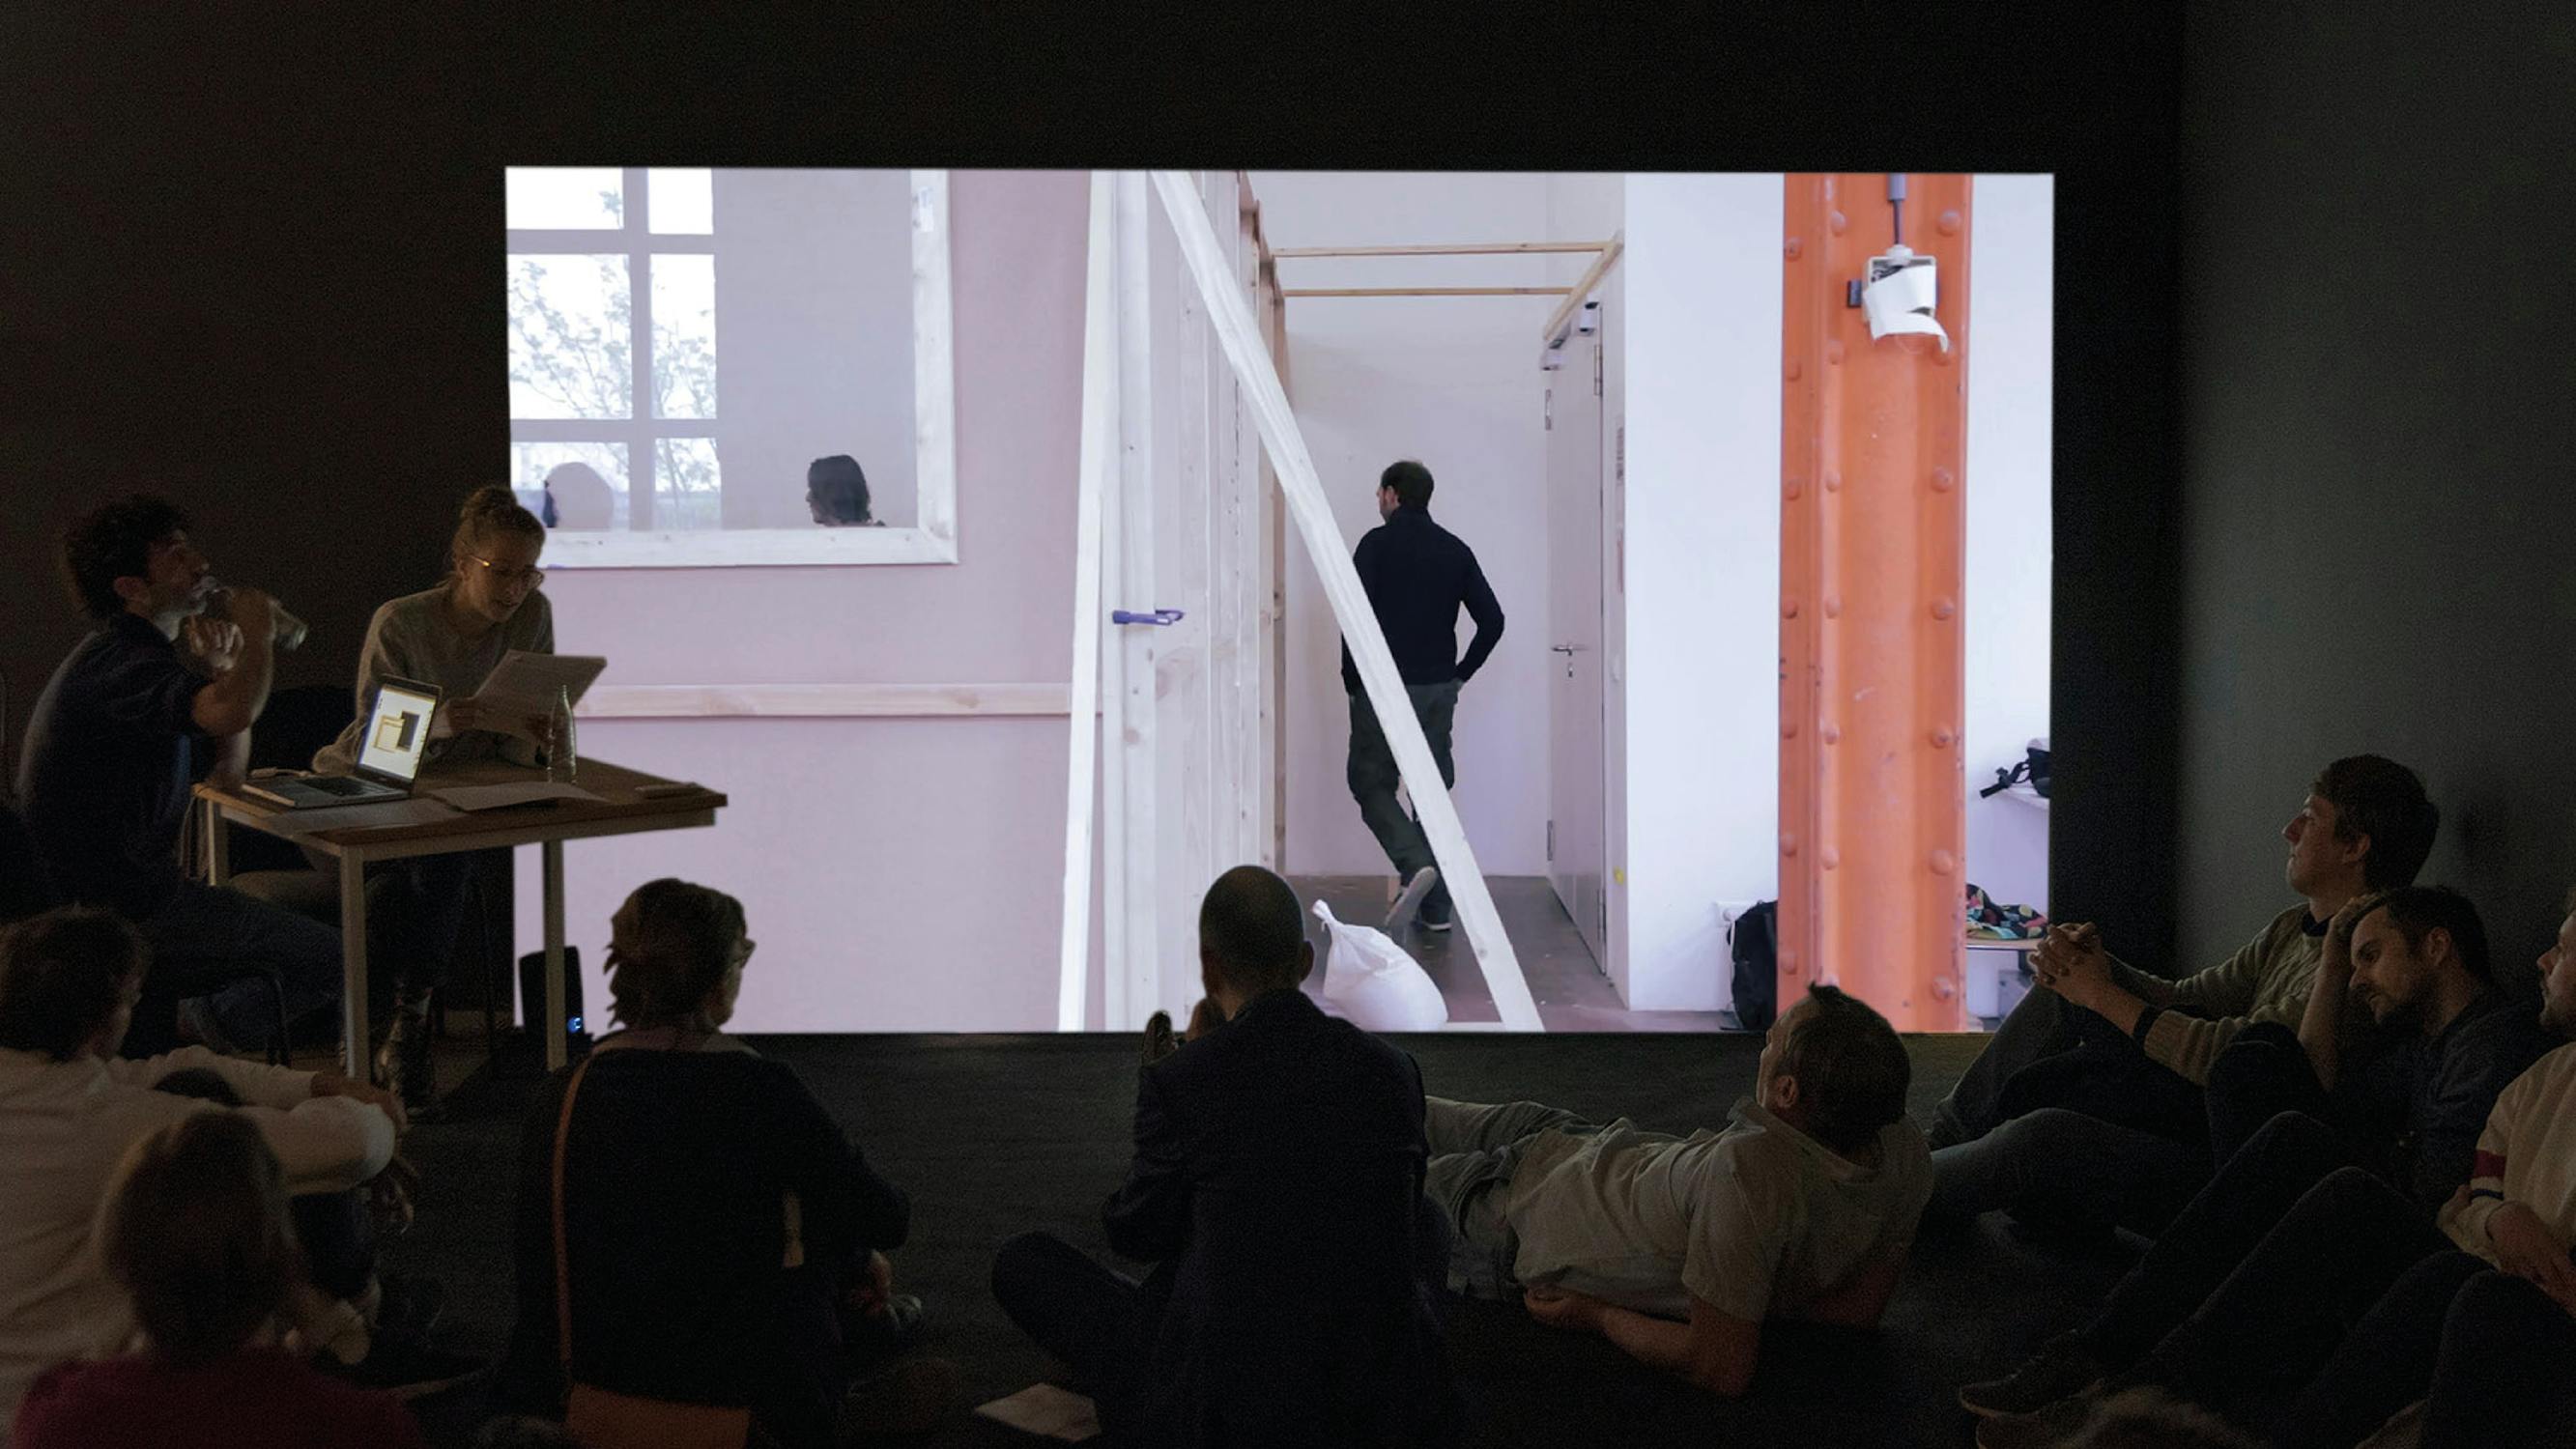 henry bradley, Requiem for a Failed State at HALLE 14, Centre for Contemporary Art, Leipzig, Germany 2018 installation of Rhythminghenry bradley, Rehearsal 2, performance, 3h, 2017